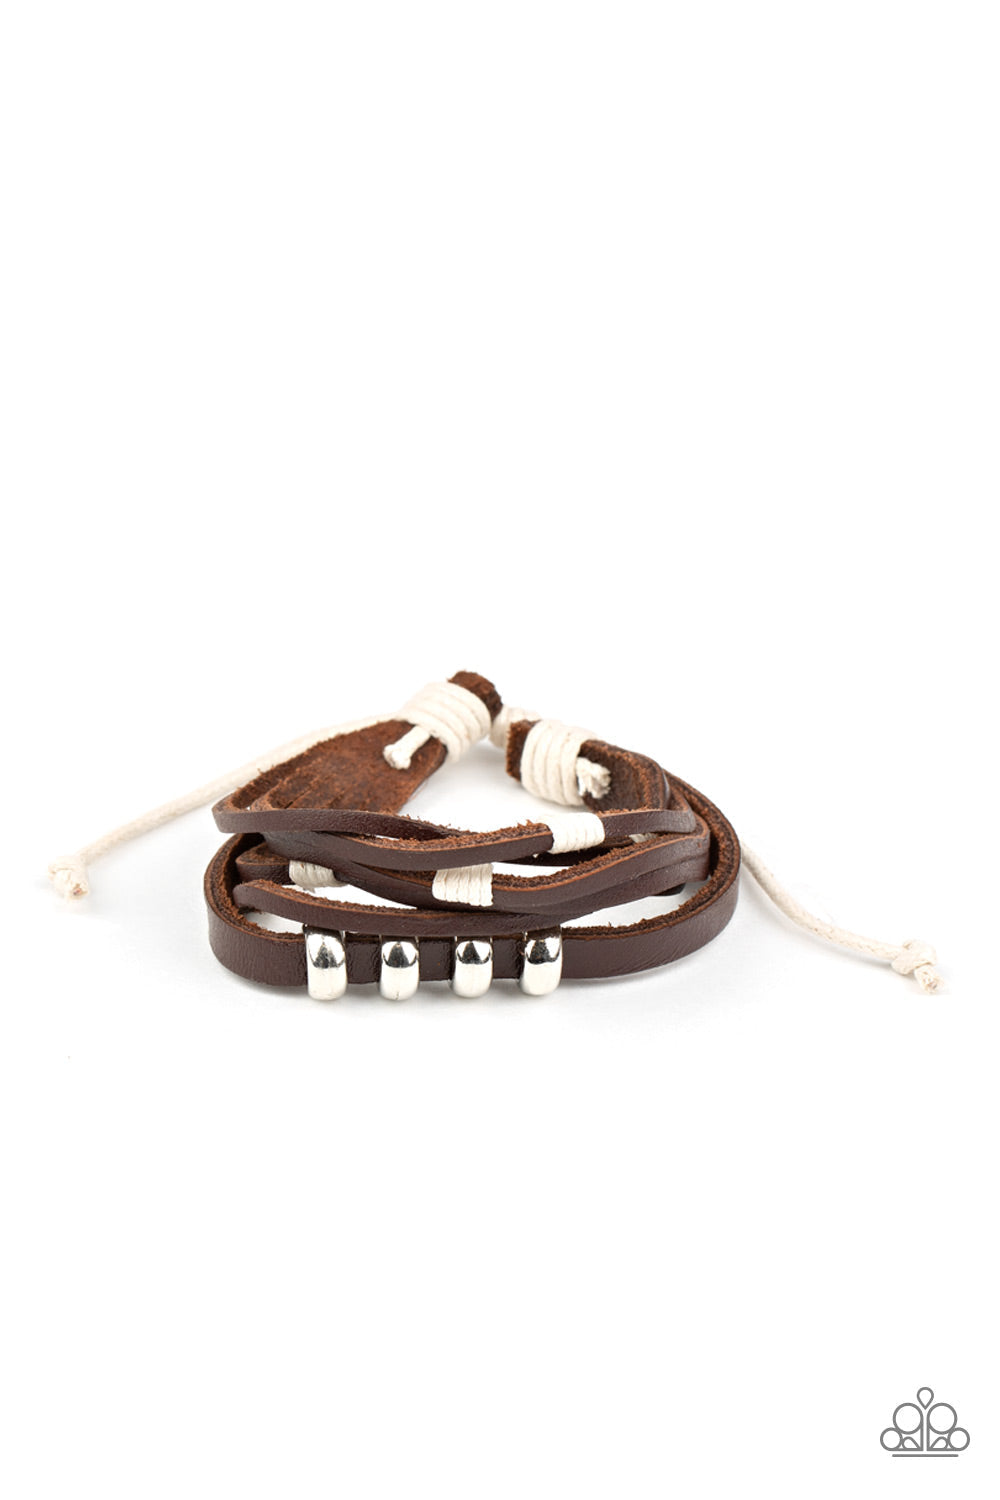 Solo Quest Brown Urban - Leather Bracelet - Paparazzi Accessories - Featuring white threaded and silver beaded accents, mismatched strands of brown leather bands layer across the wrist for an earthy flair. Features an adjustable sliding knot closure. Trendy fashion jewelry for everyone.